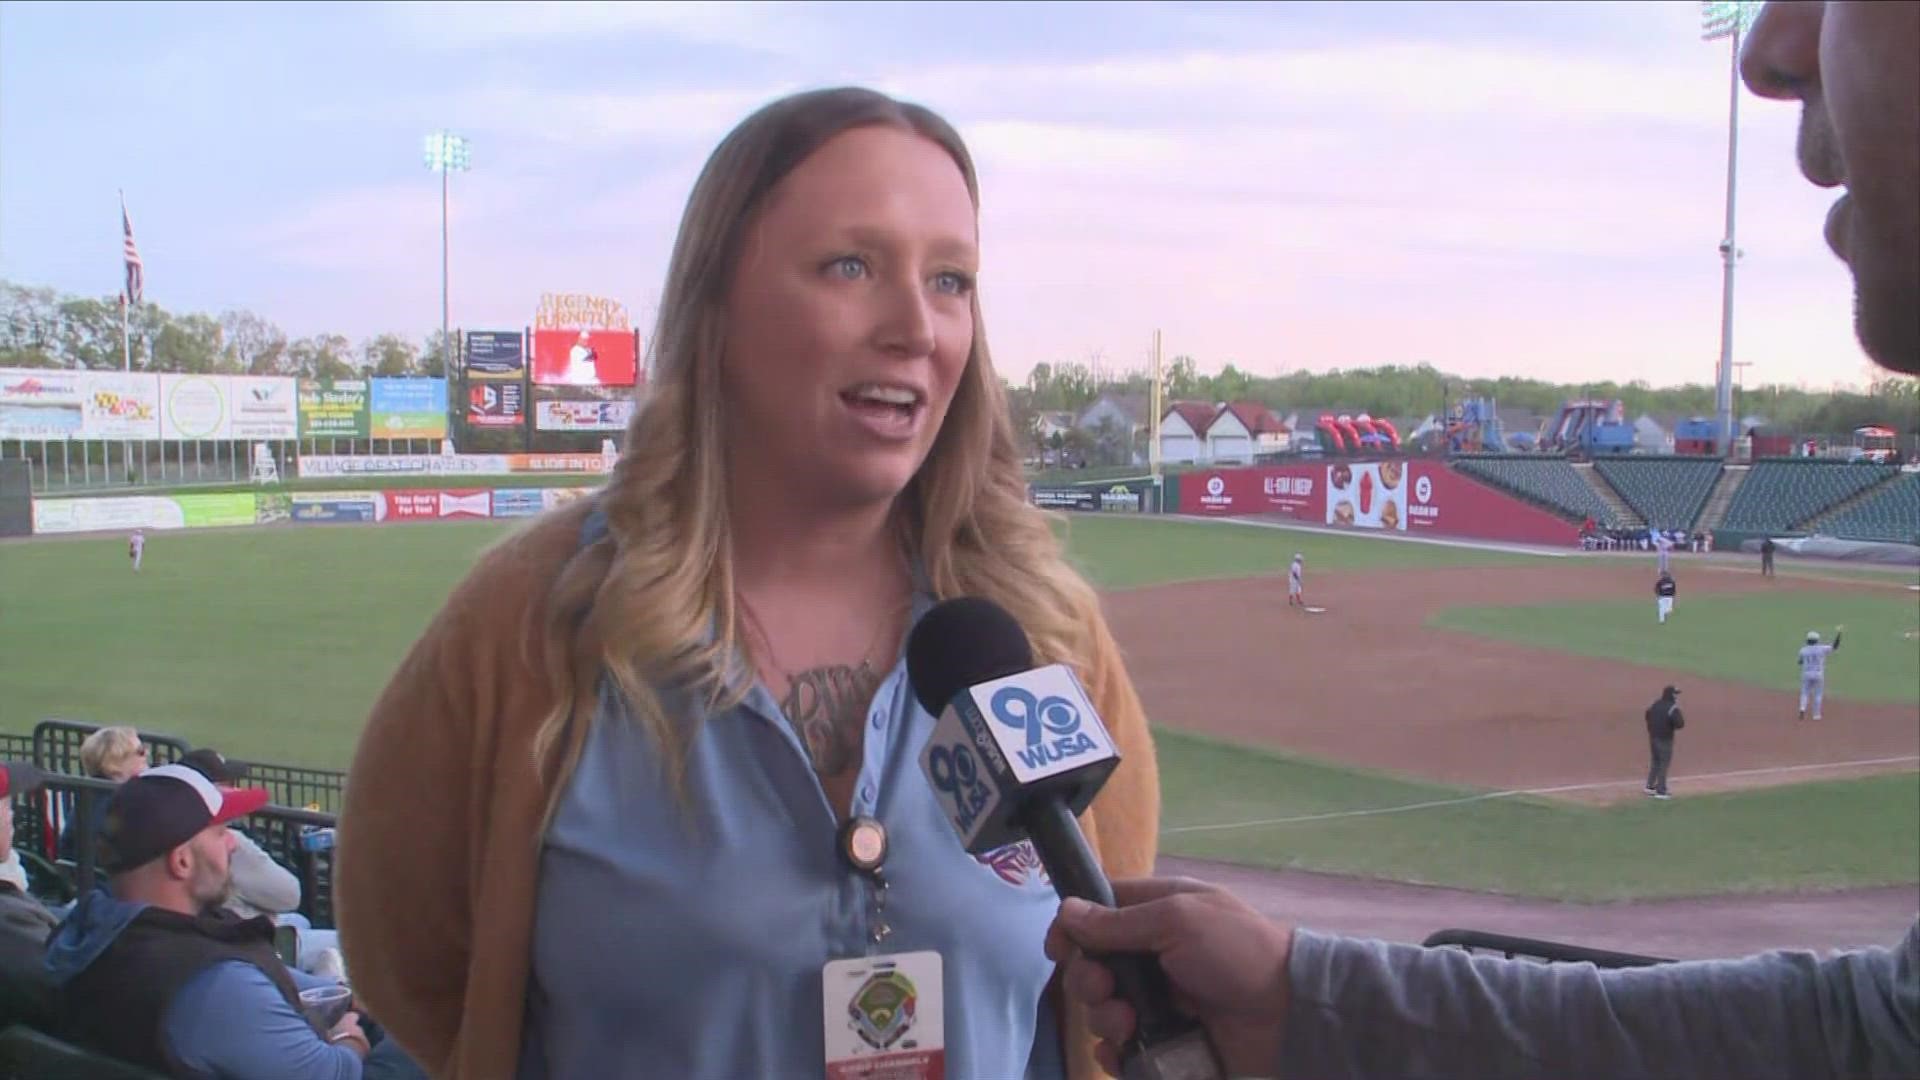 Courtney Knichel, the general manager of the Maryland Atlantic League of Professional Baseball team based in Waldorf.